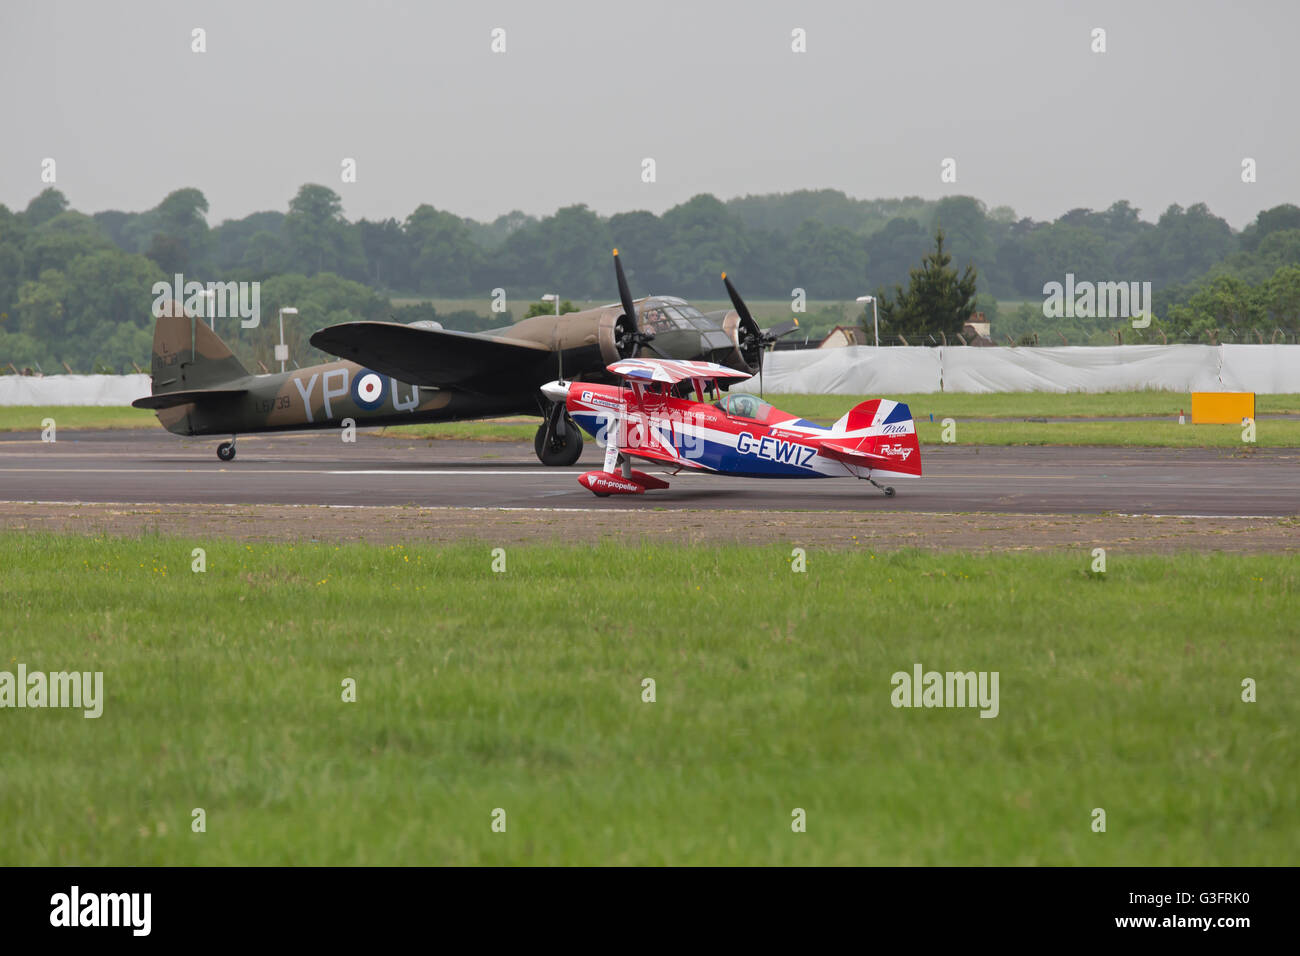 Biggin Hill, UK. 11th June 2016. Pitts S2S passes the Bristol Blenheim G-BPIV on the runway at the Biggin Hill Festival of Fligh Credit: Keith Larby/Alamy Live News Stock Photo